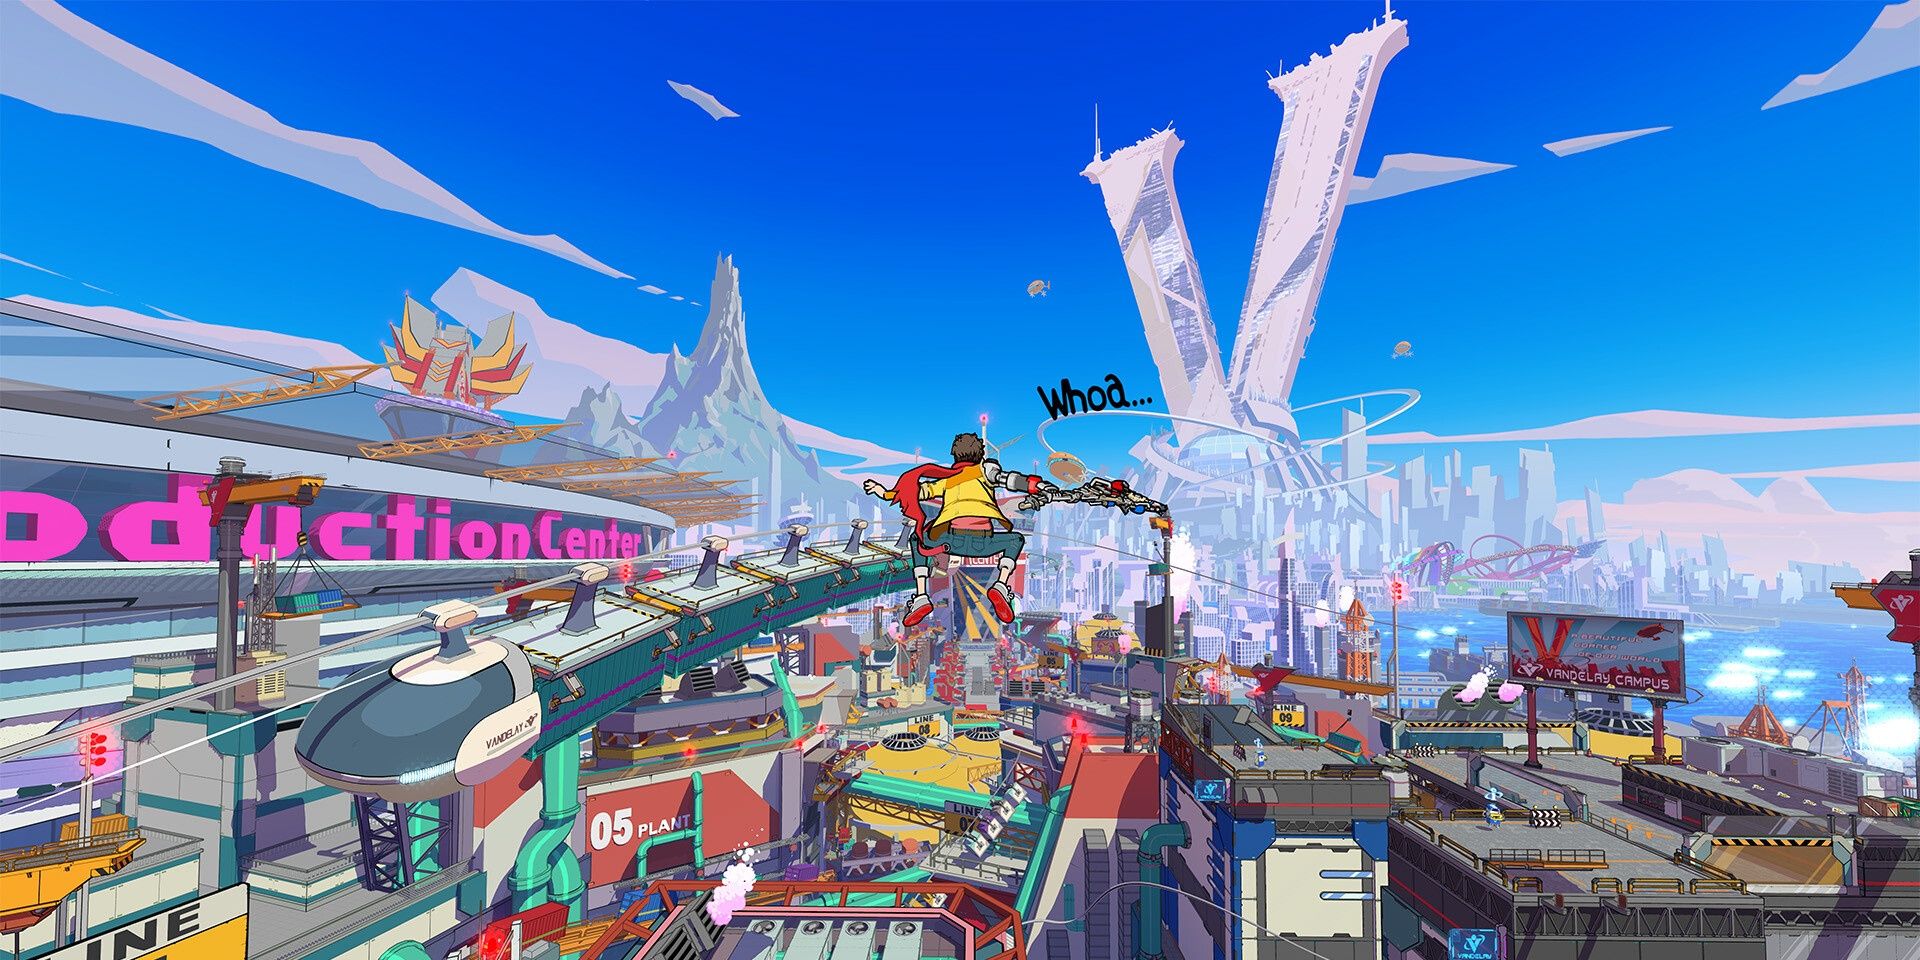 Chai being launched into the sky out of a facility overlooking the entire corporation in Hi-Fi Rush